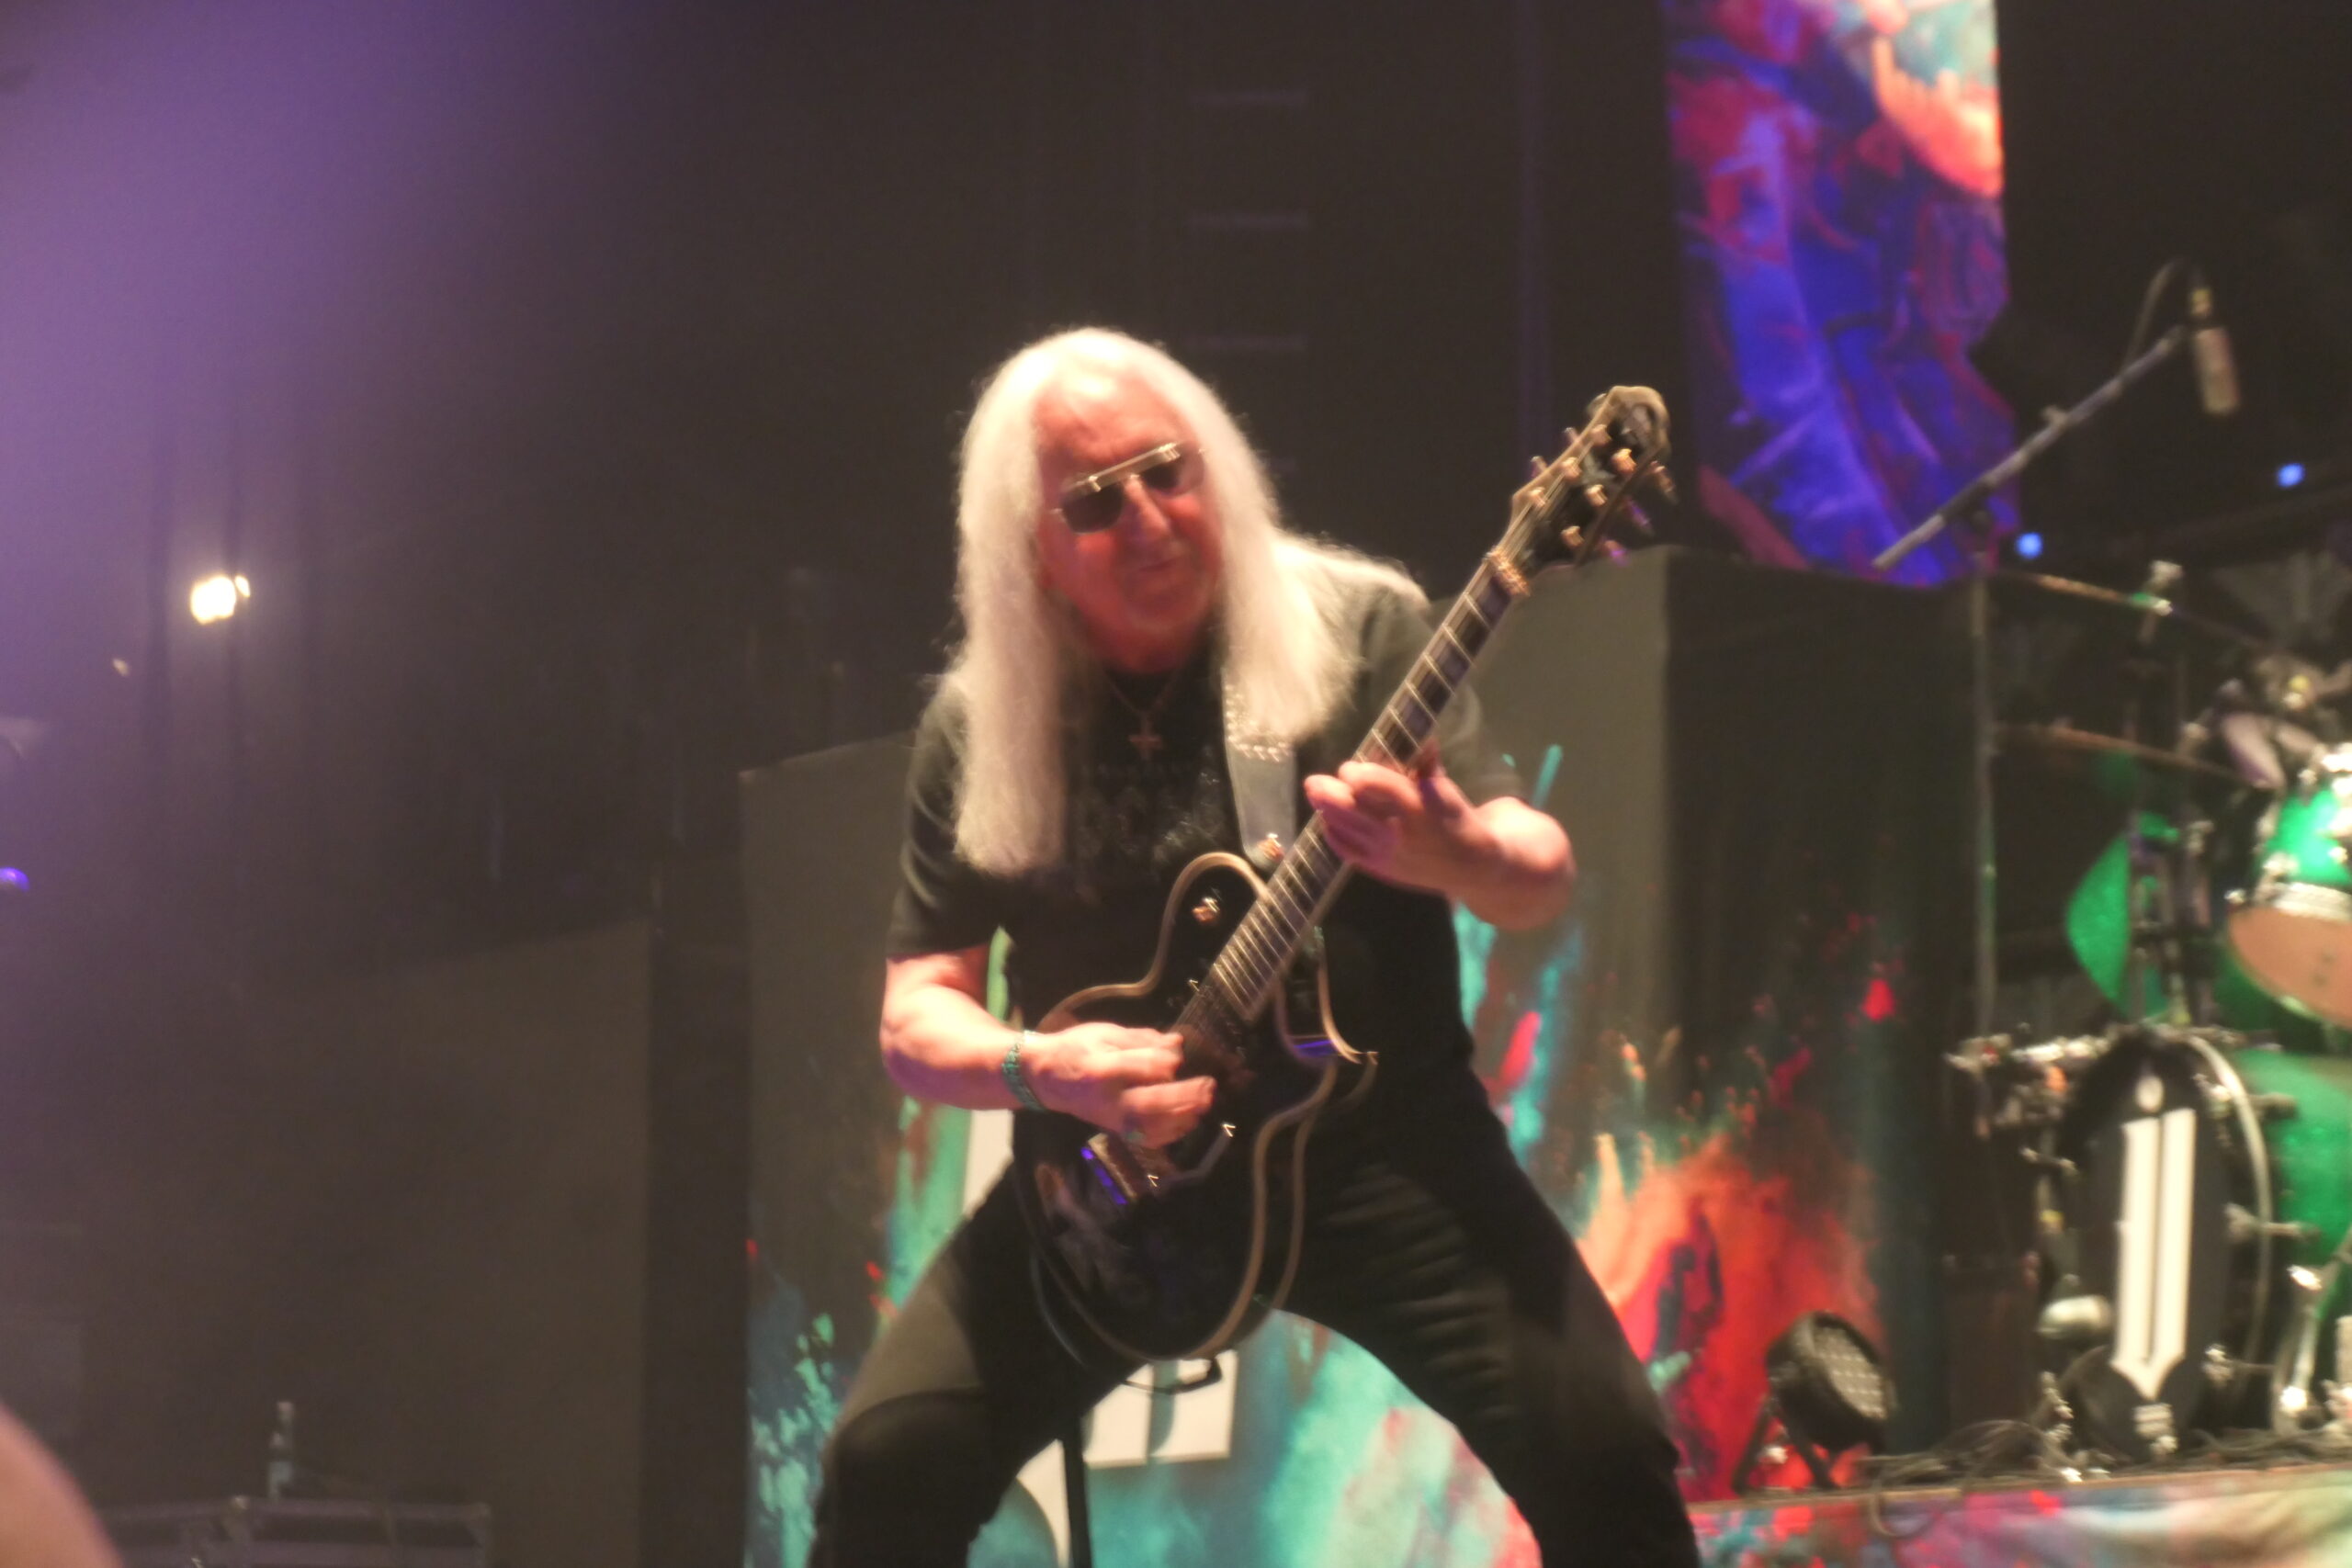 Archive – Gig review: Uriah Heep at The Metro, Sydney (2015)